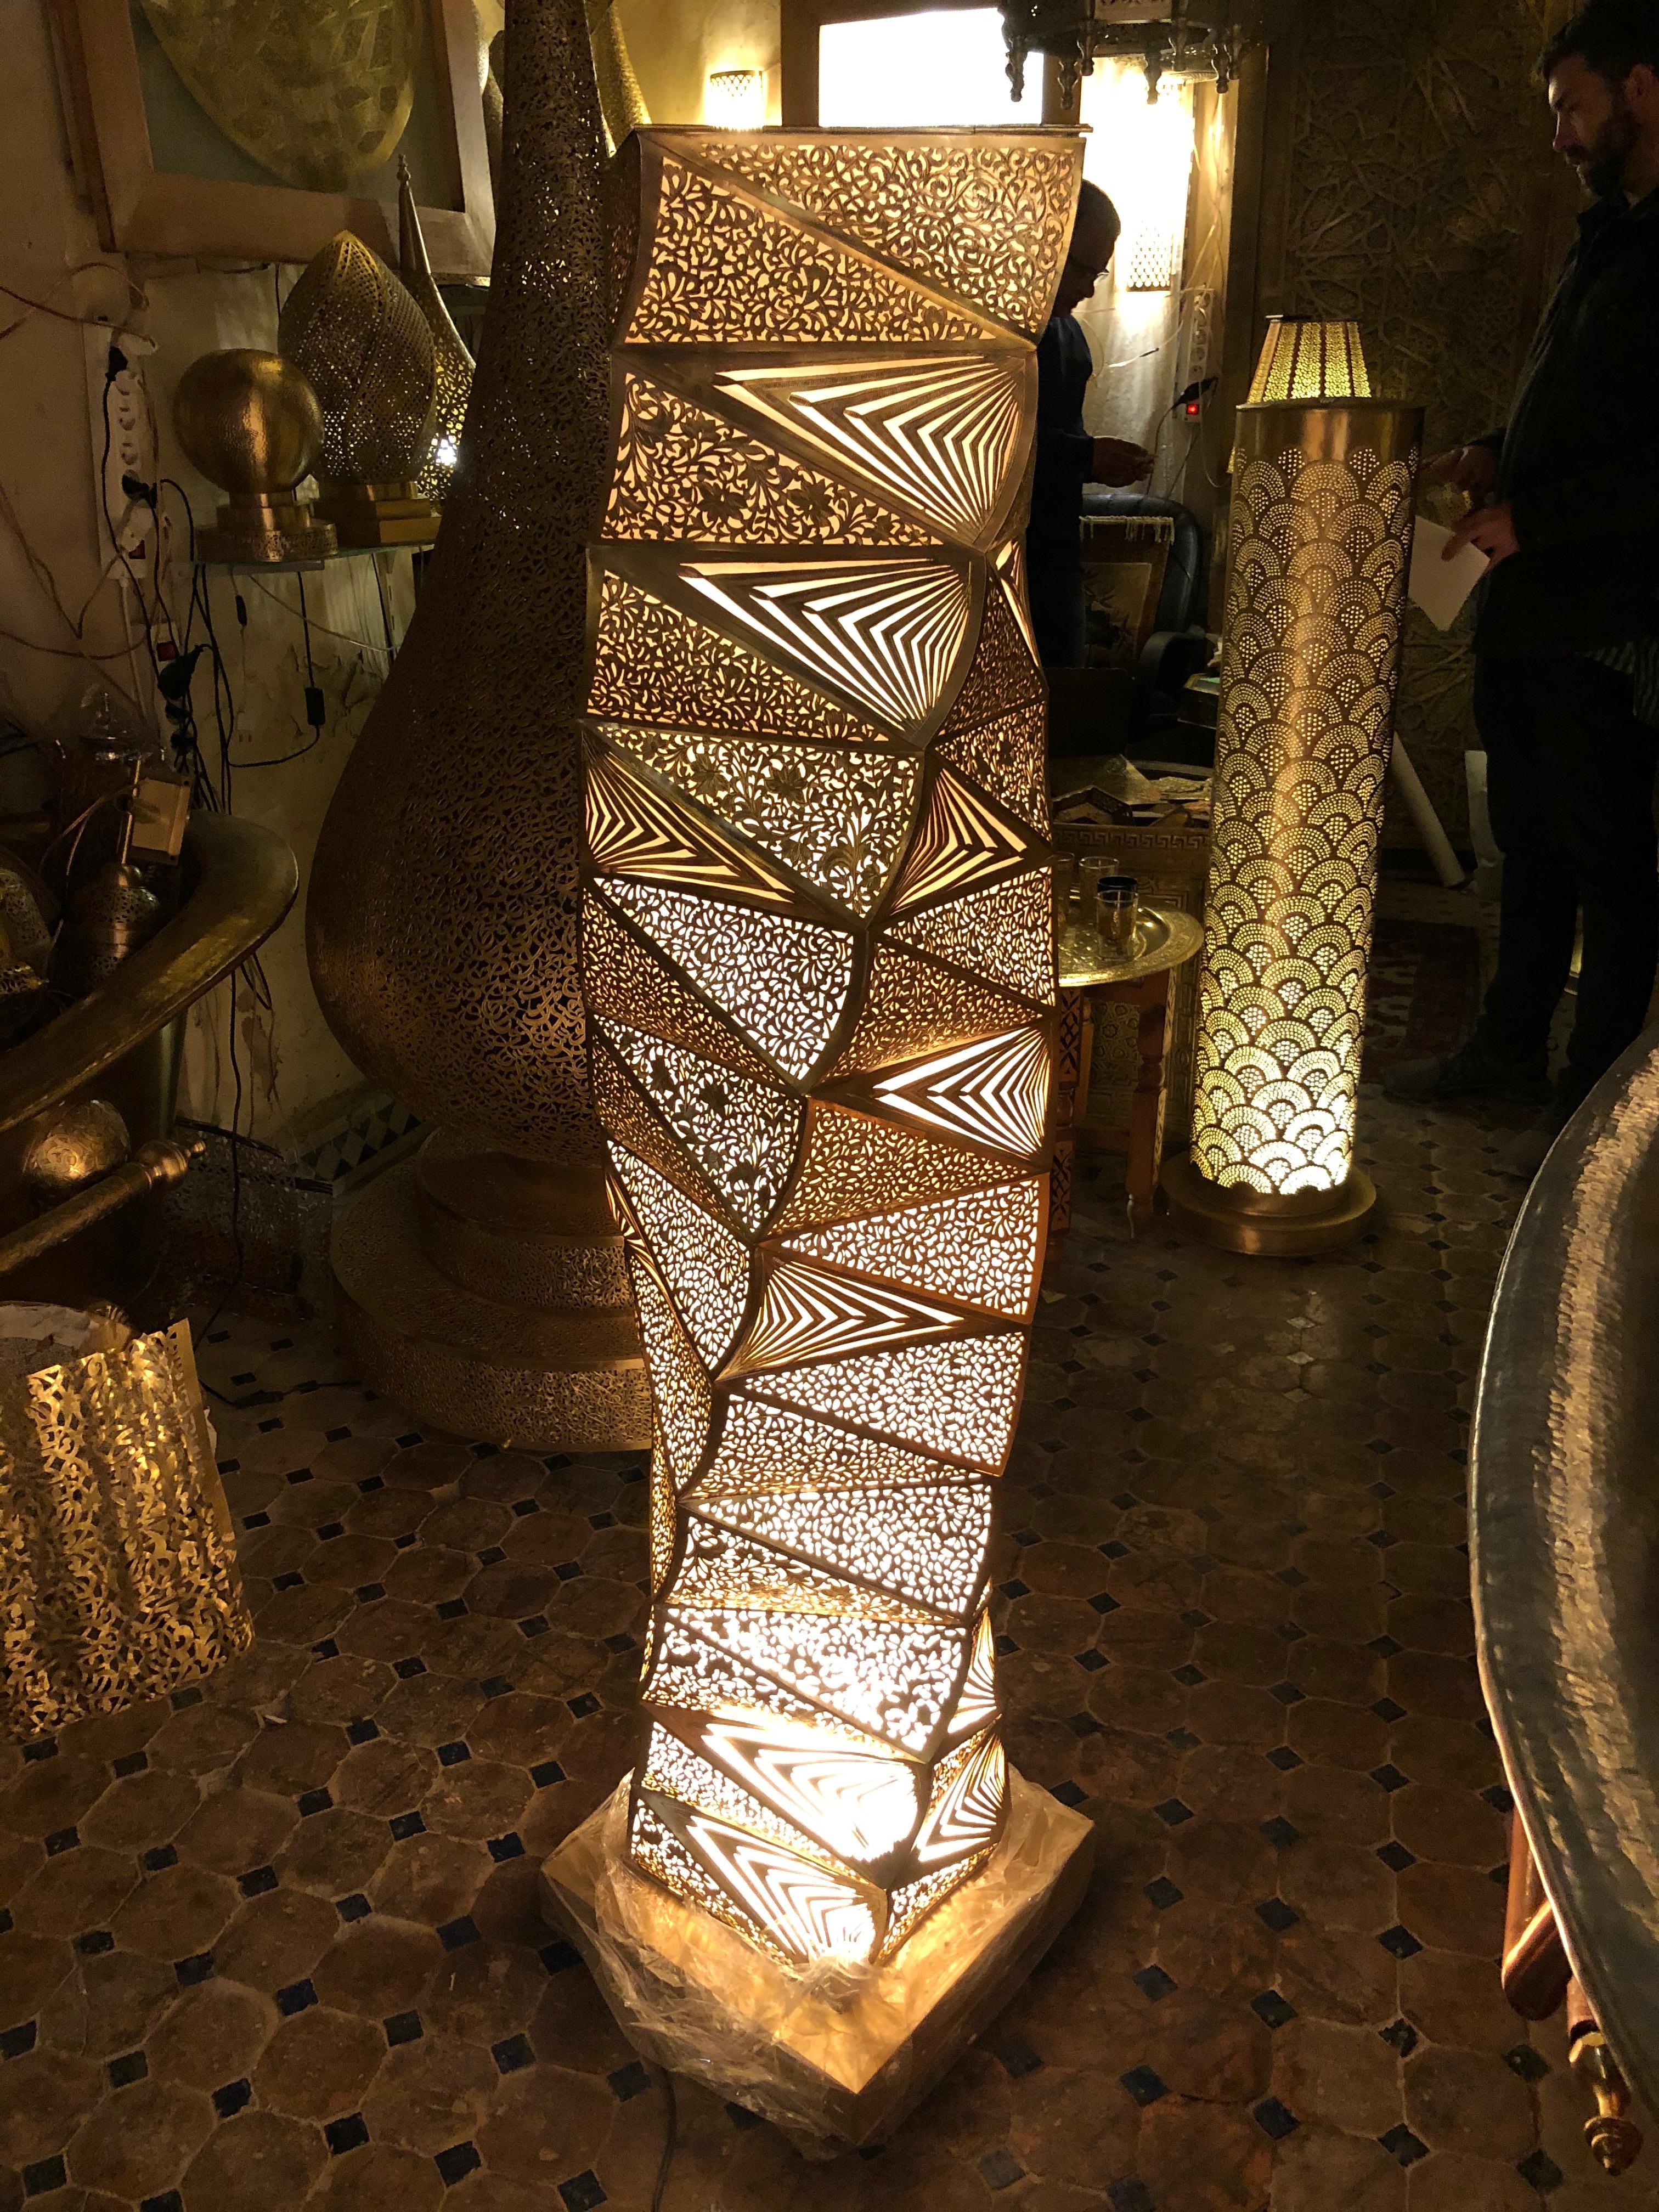 Custom designed for our 1stdibs clients

This fine floor lamp in our unique tower form design emits stunning light through over 100 hand cut and hand pierced copper panels- a wonderful accent in your decor with our without its electrifying lights